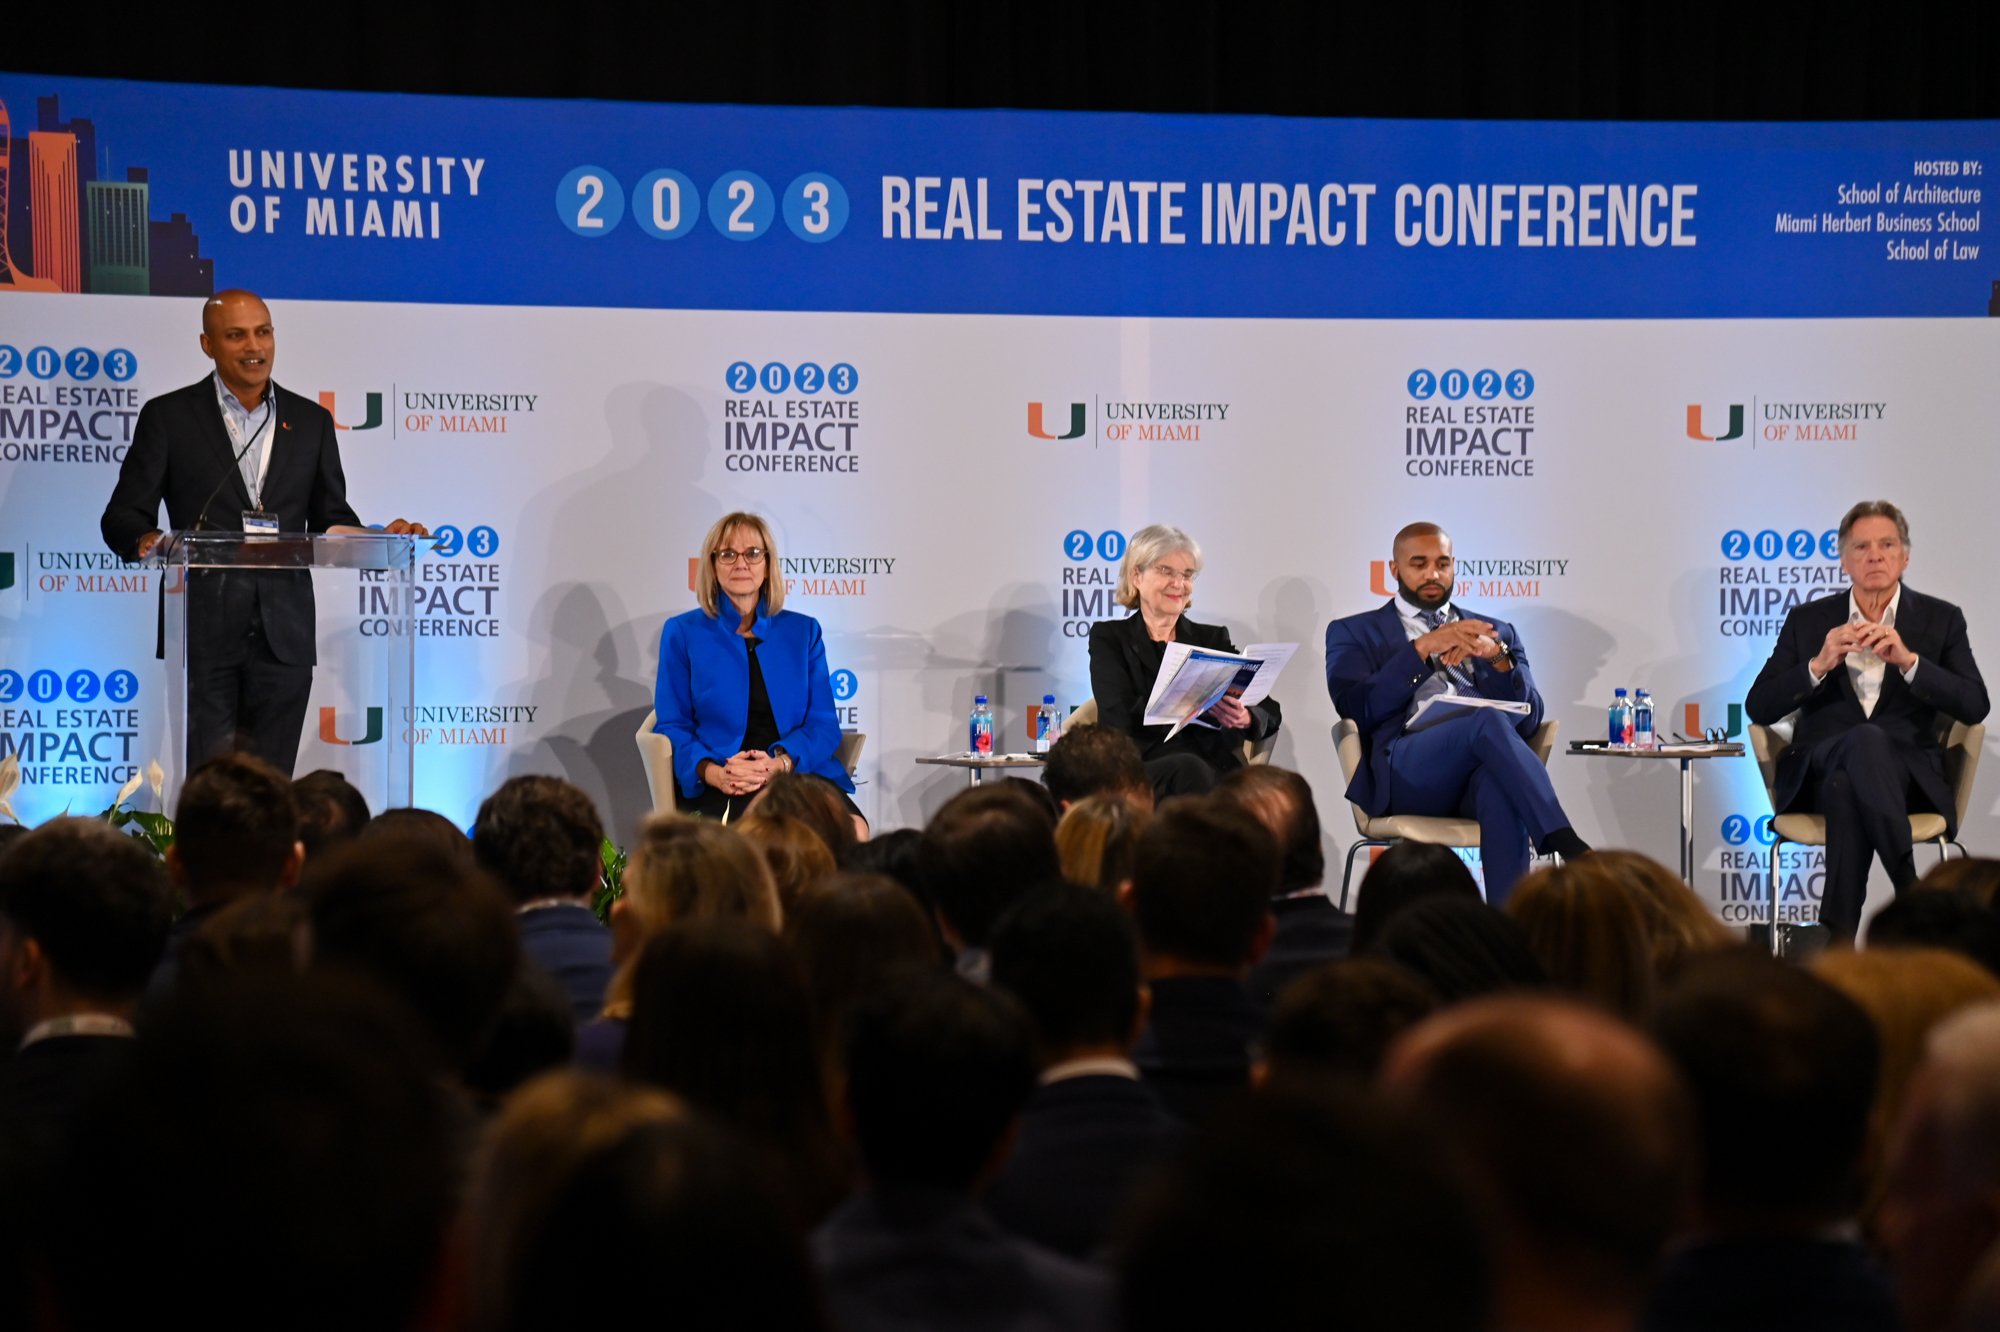 University of Miami Real Estate Impact Conference 2023 The Largest Edition Yet As Real Estate Leaders Discuss The State of Miami Real Estate 299.jpg